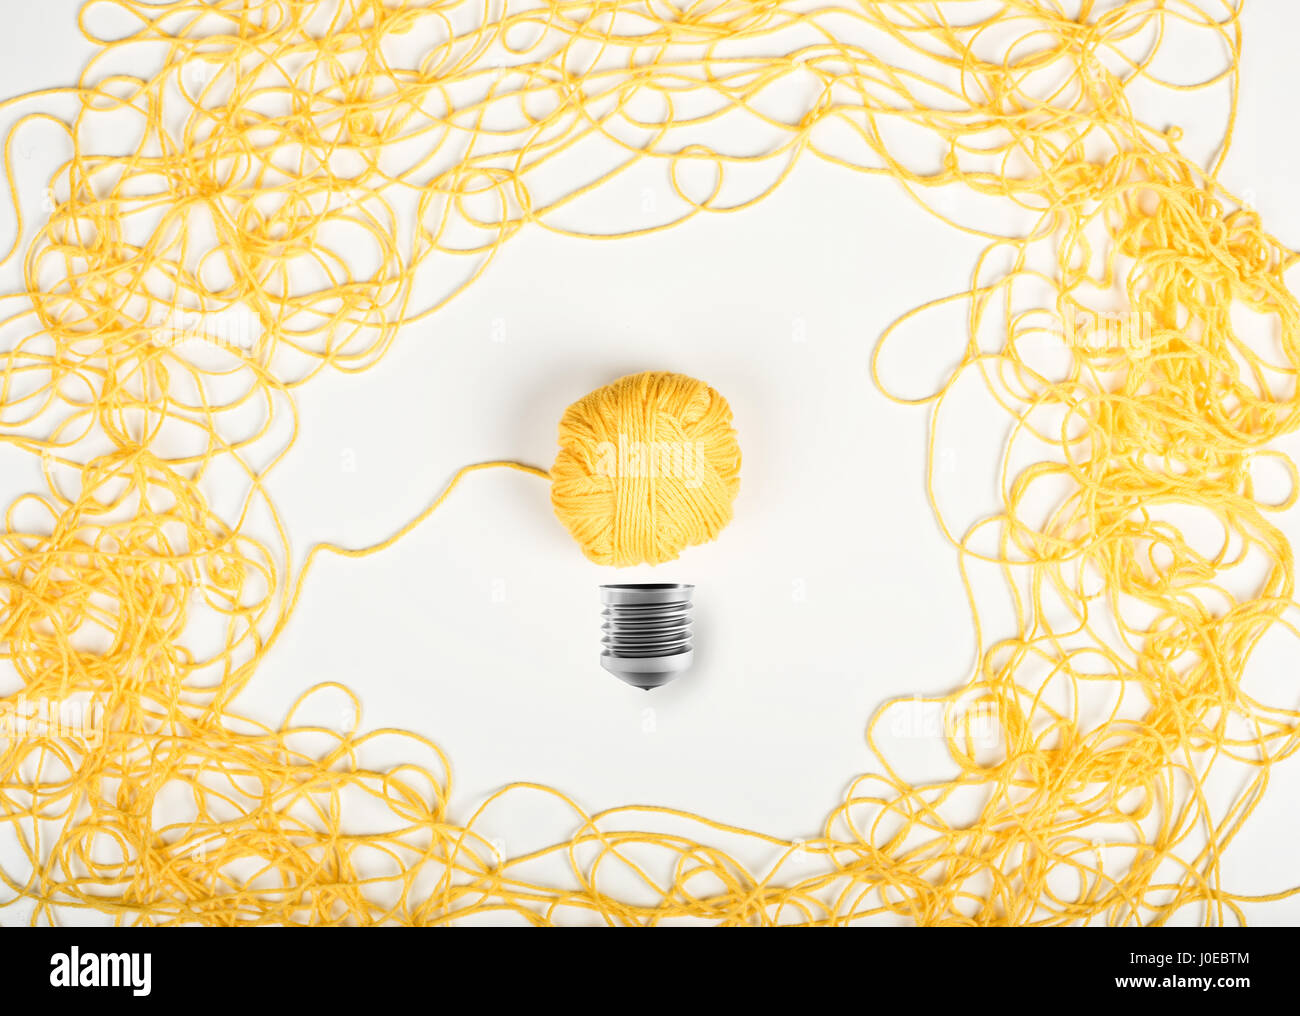 Concept of idea and innovation with wool ball Stock Photo